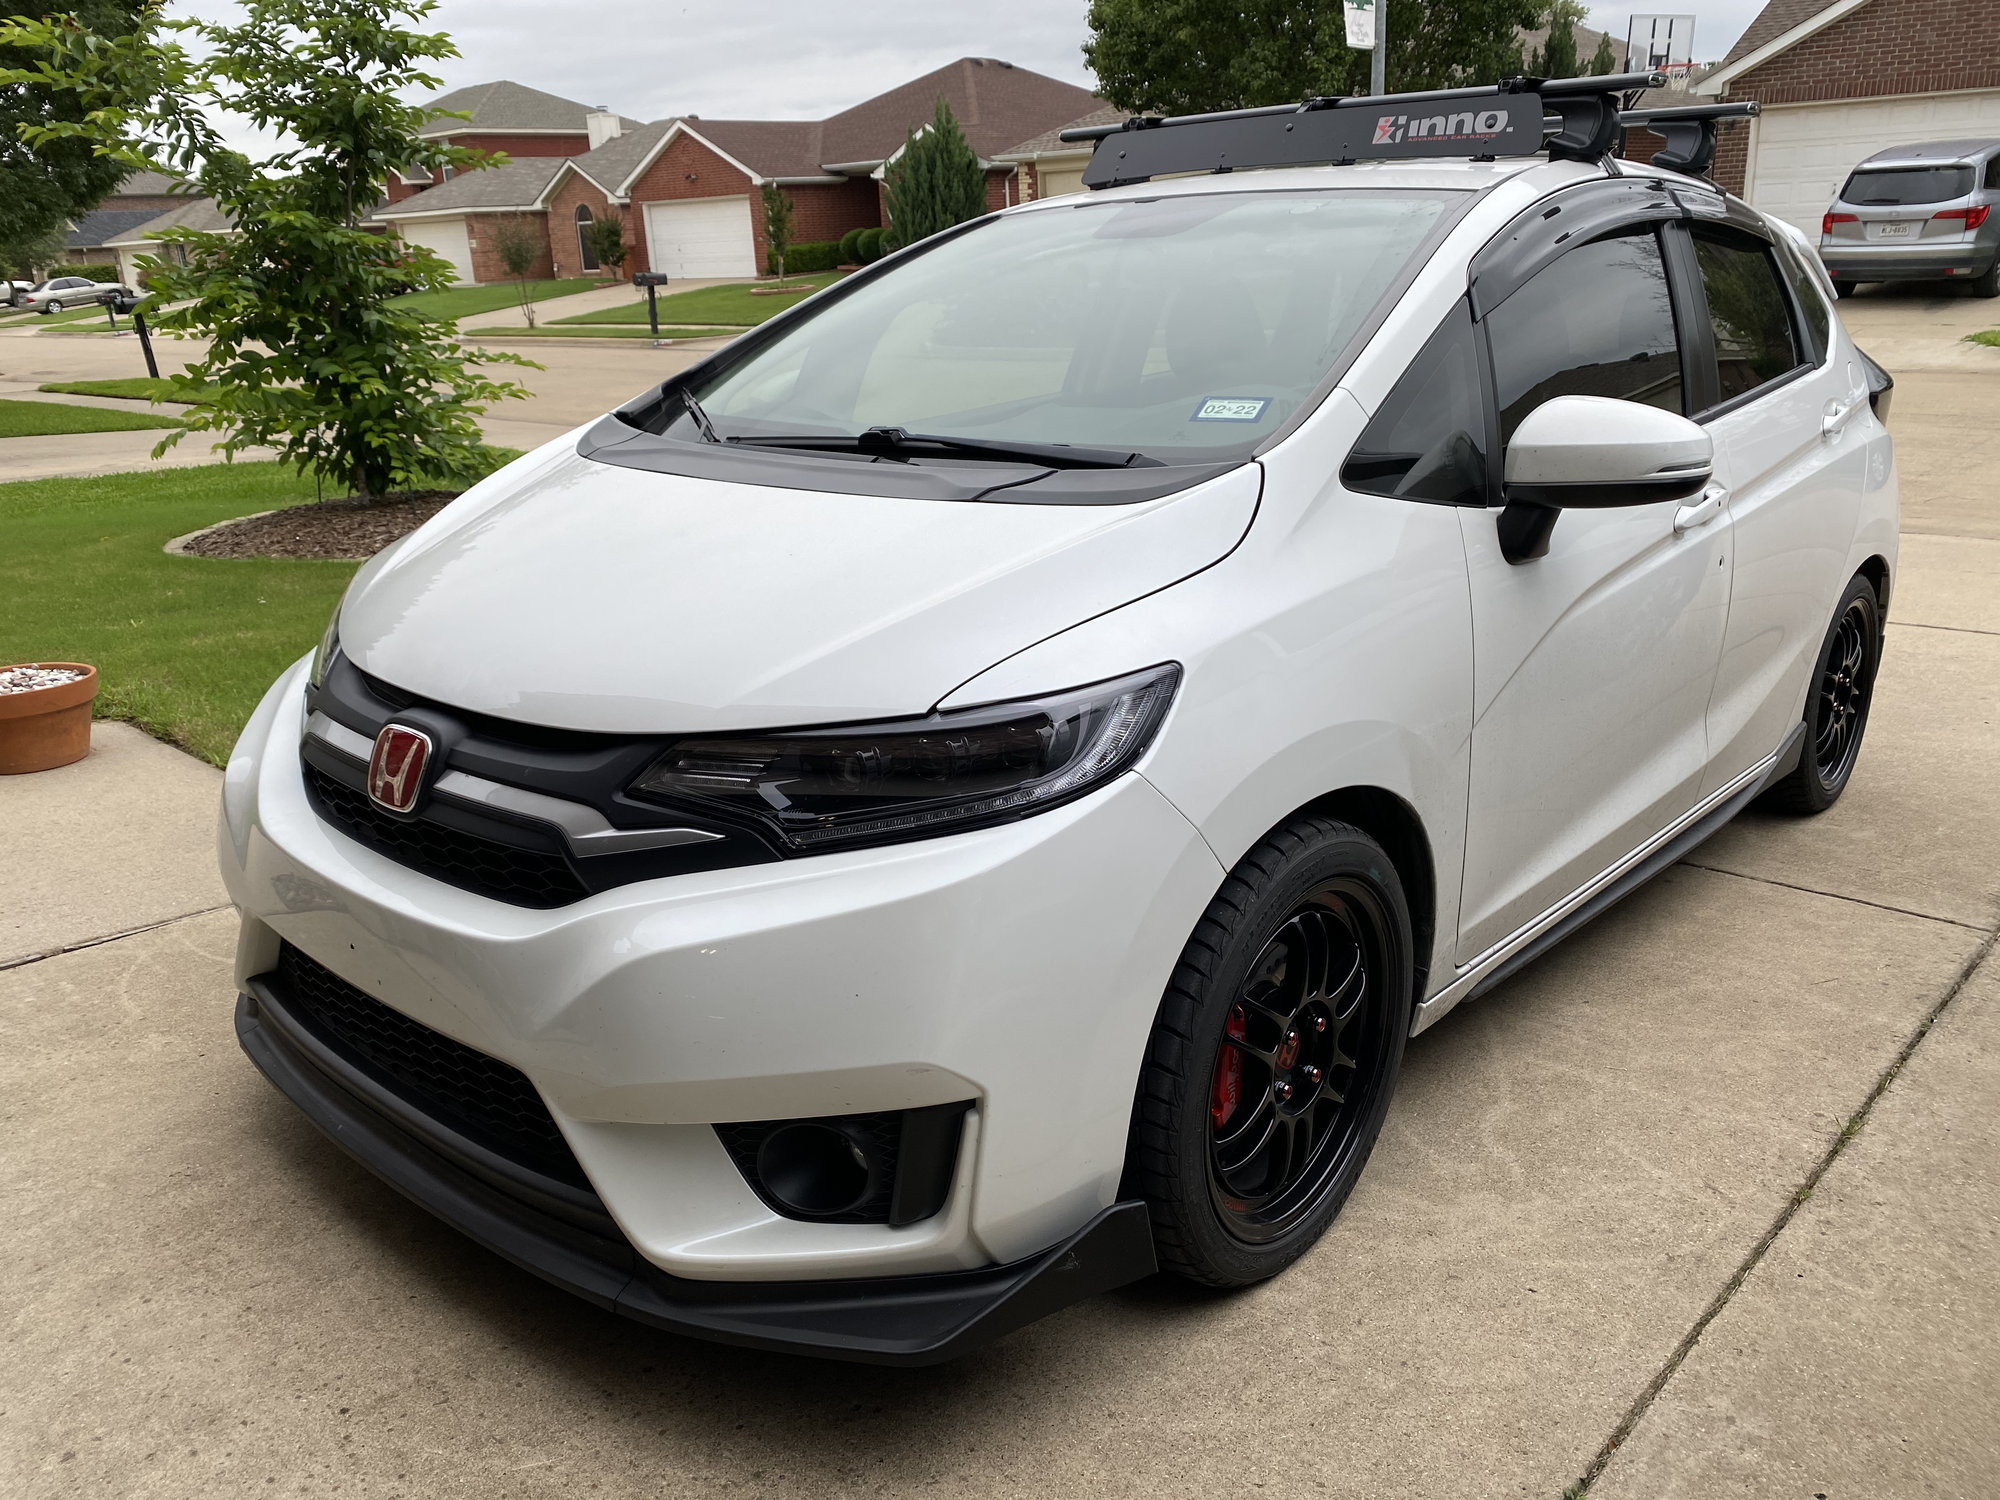 MODS/ACCESSORIES for the GK - Page 94 - Unofficial Honda FIT Forums